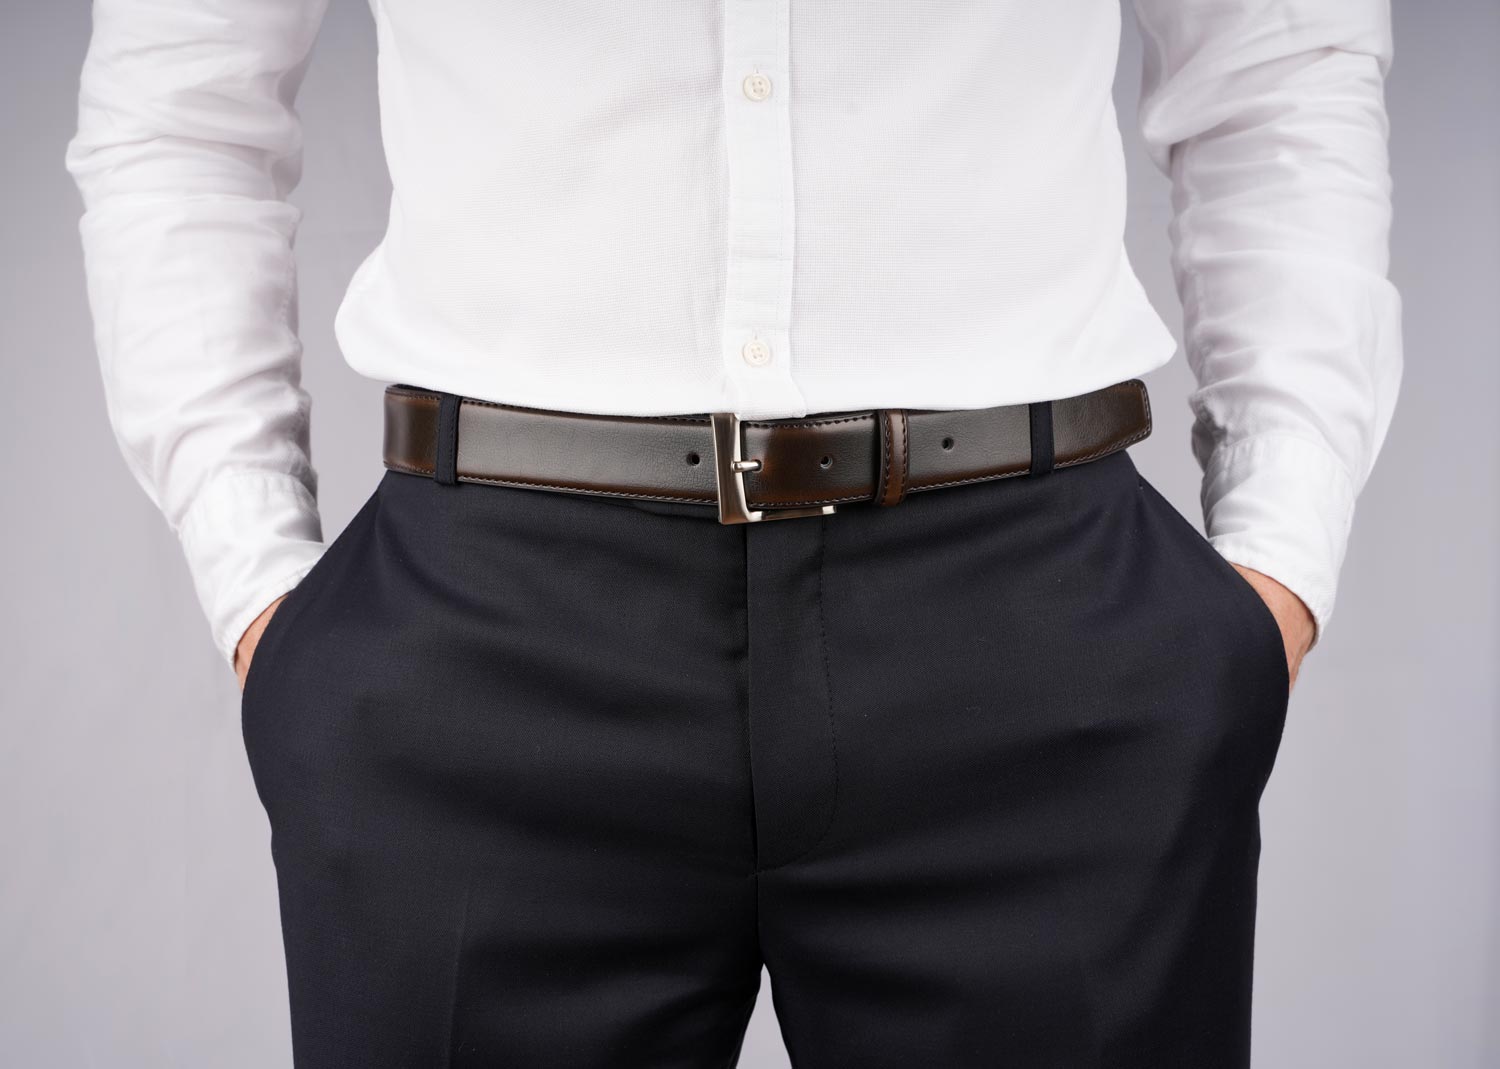 Everything You Need to Know About Men's Formal Belts